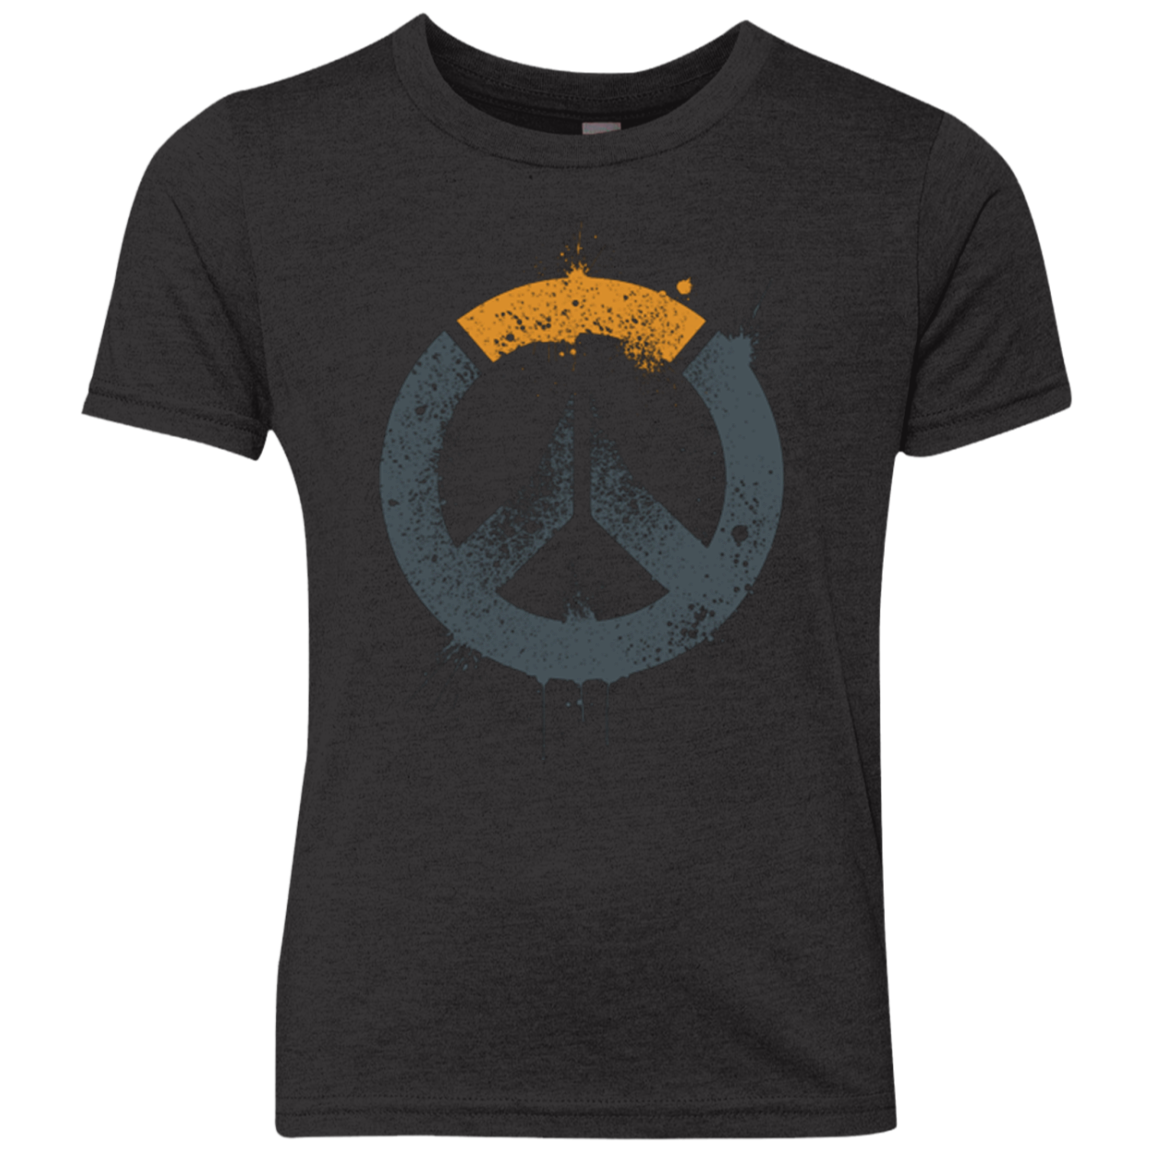 Overwatch Youth Triblend T-Shirt